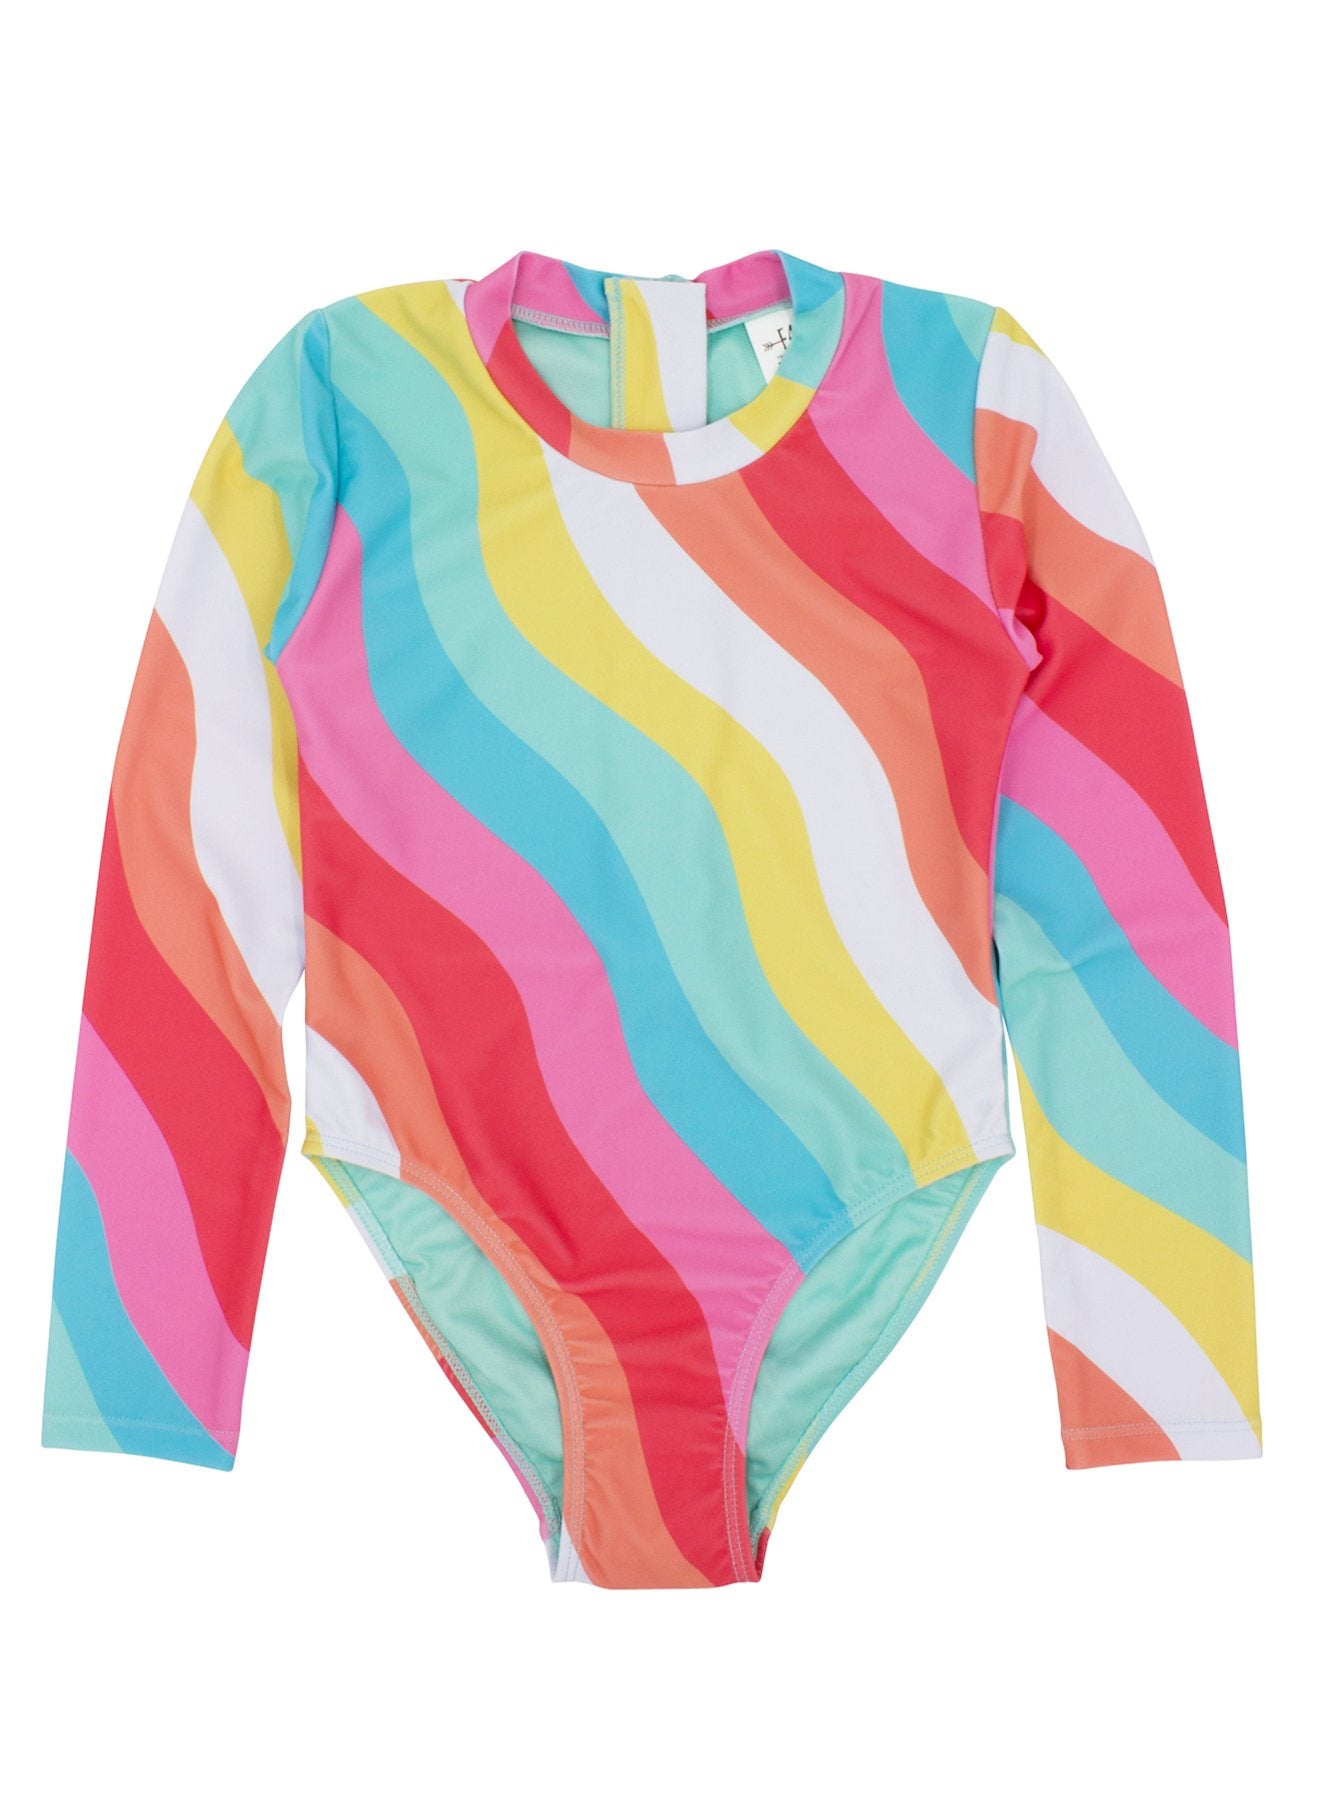 Feather 4 Arrow - Wave Chaser Surf Suit - Tropical